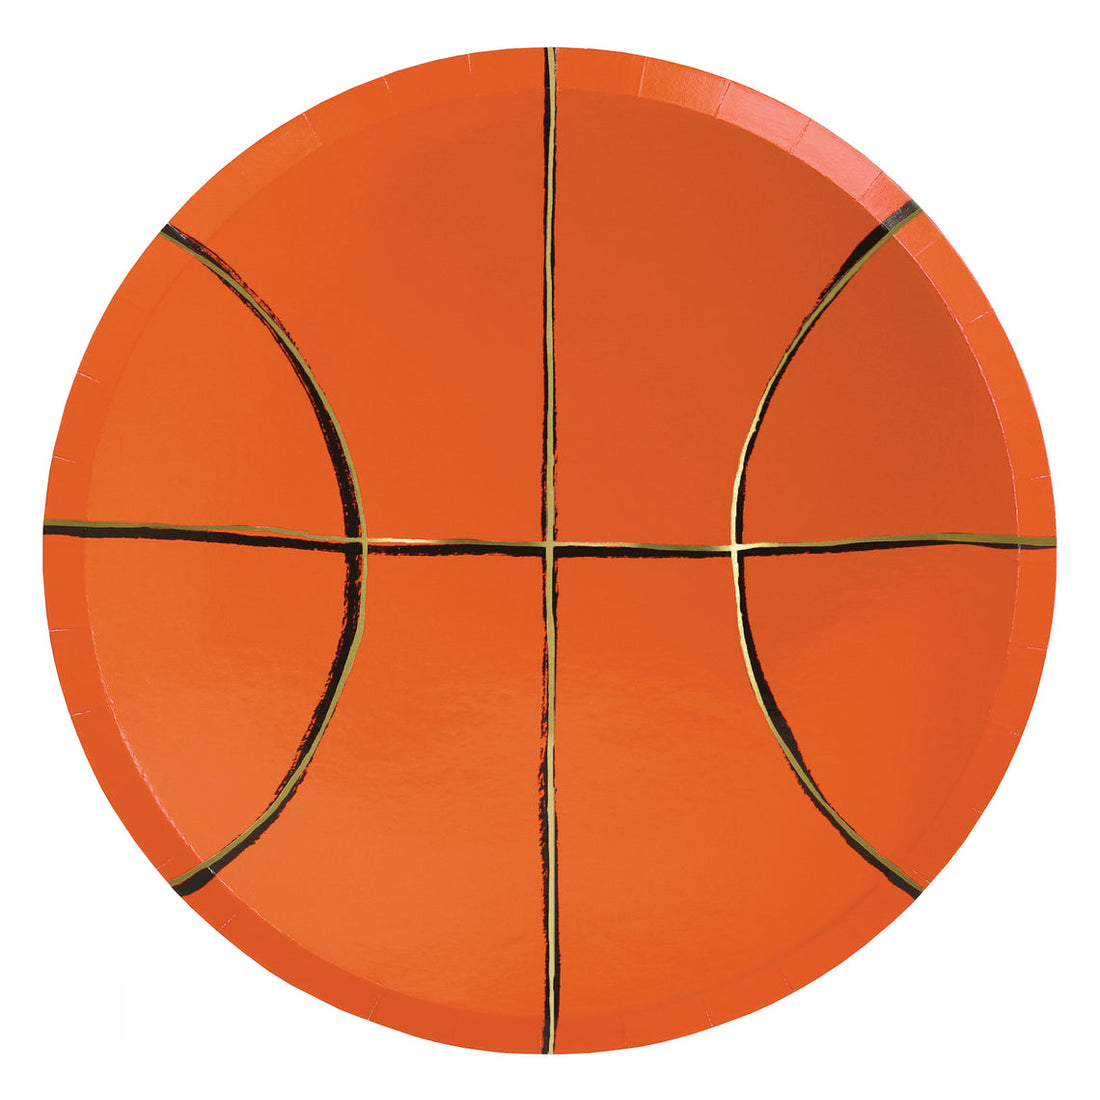 A Meri Meri basketball shaped plate on a white background, perfect for birthday parties.